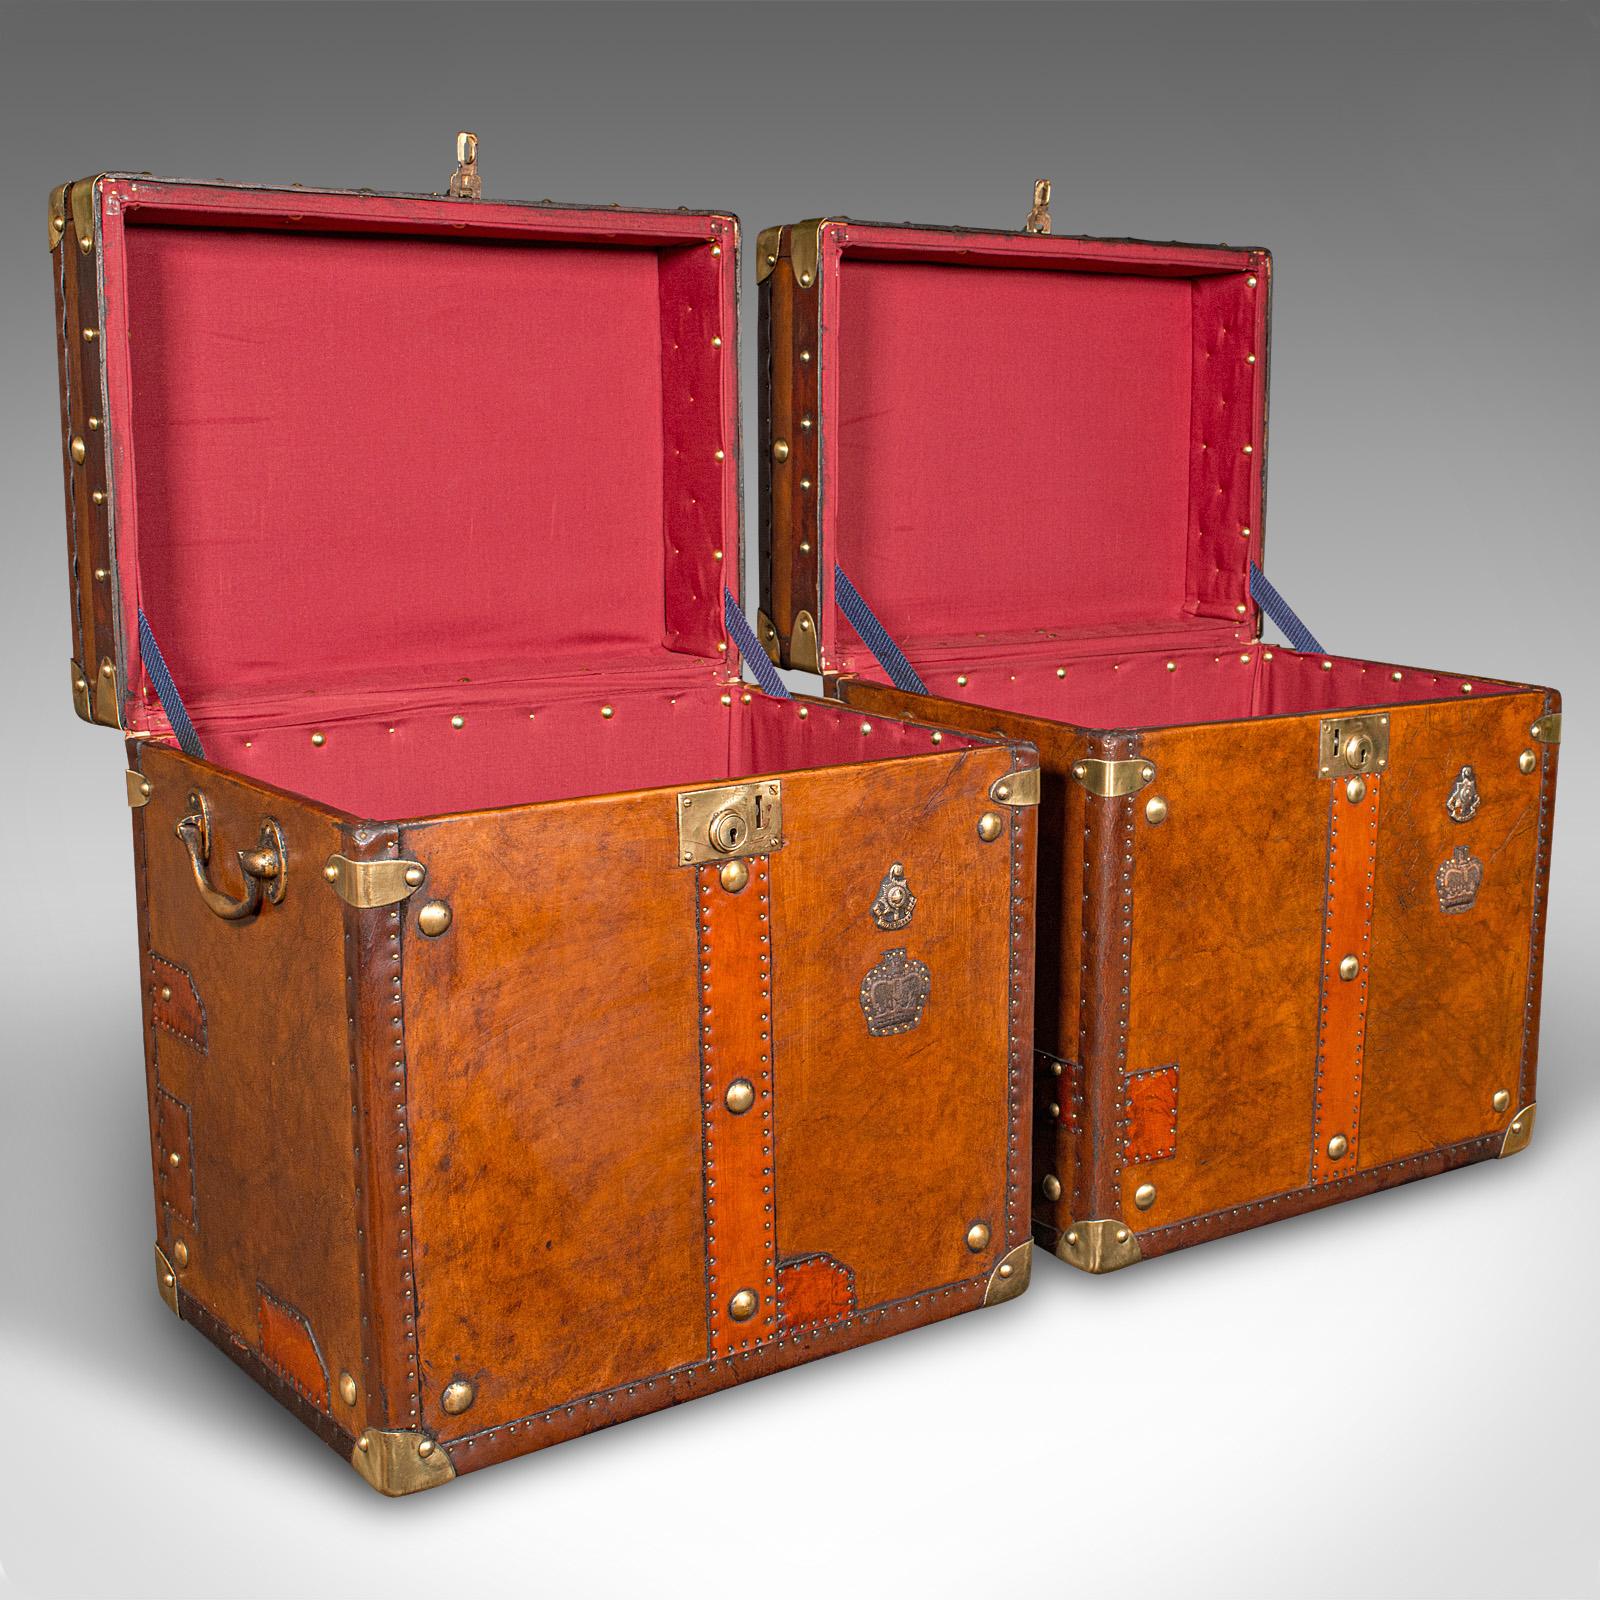 This is a pair of vintage officer's luggage cases. An English, leather and brass bound bedroom nightstand, dating to the late 20th century, circa 1980.
 
Quality casework, with beautifully appointed detail and finishes
Displaying a desirable aged